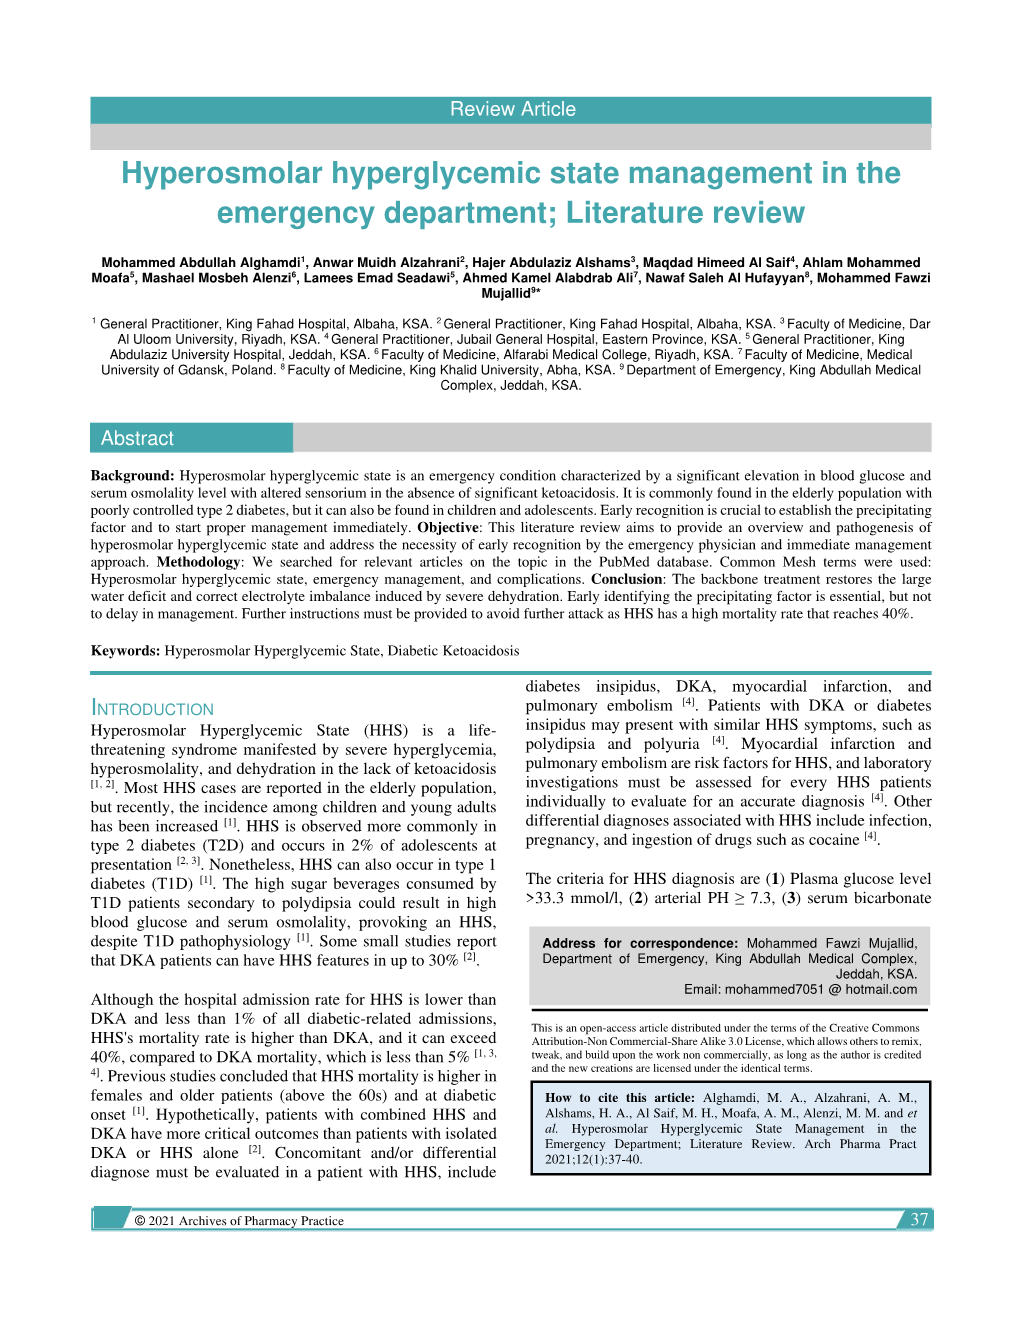 Hyperosmolar Hyperglycemic State Management in the Emergency Department; Literature Review